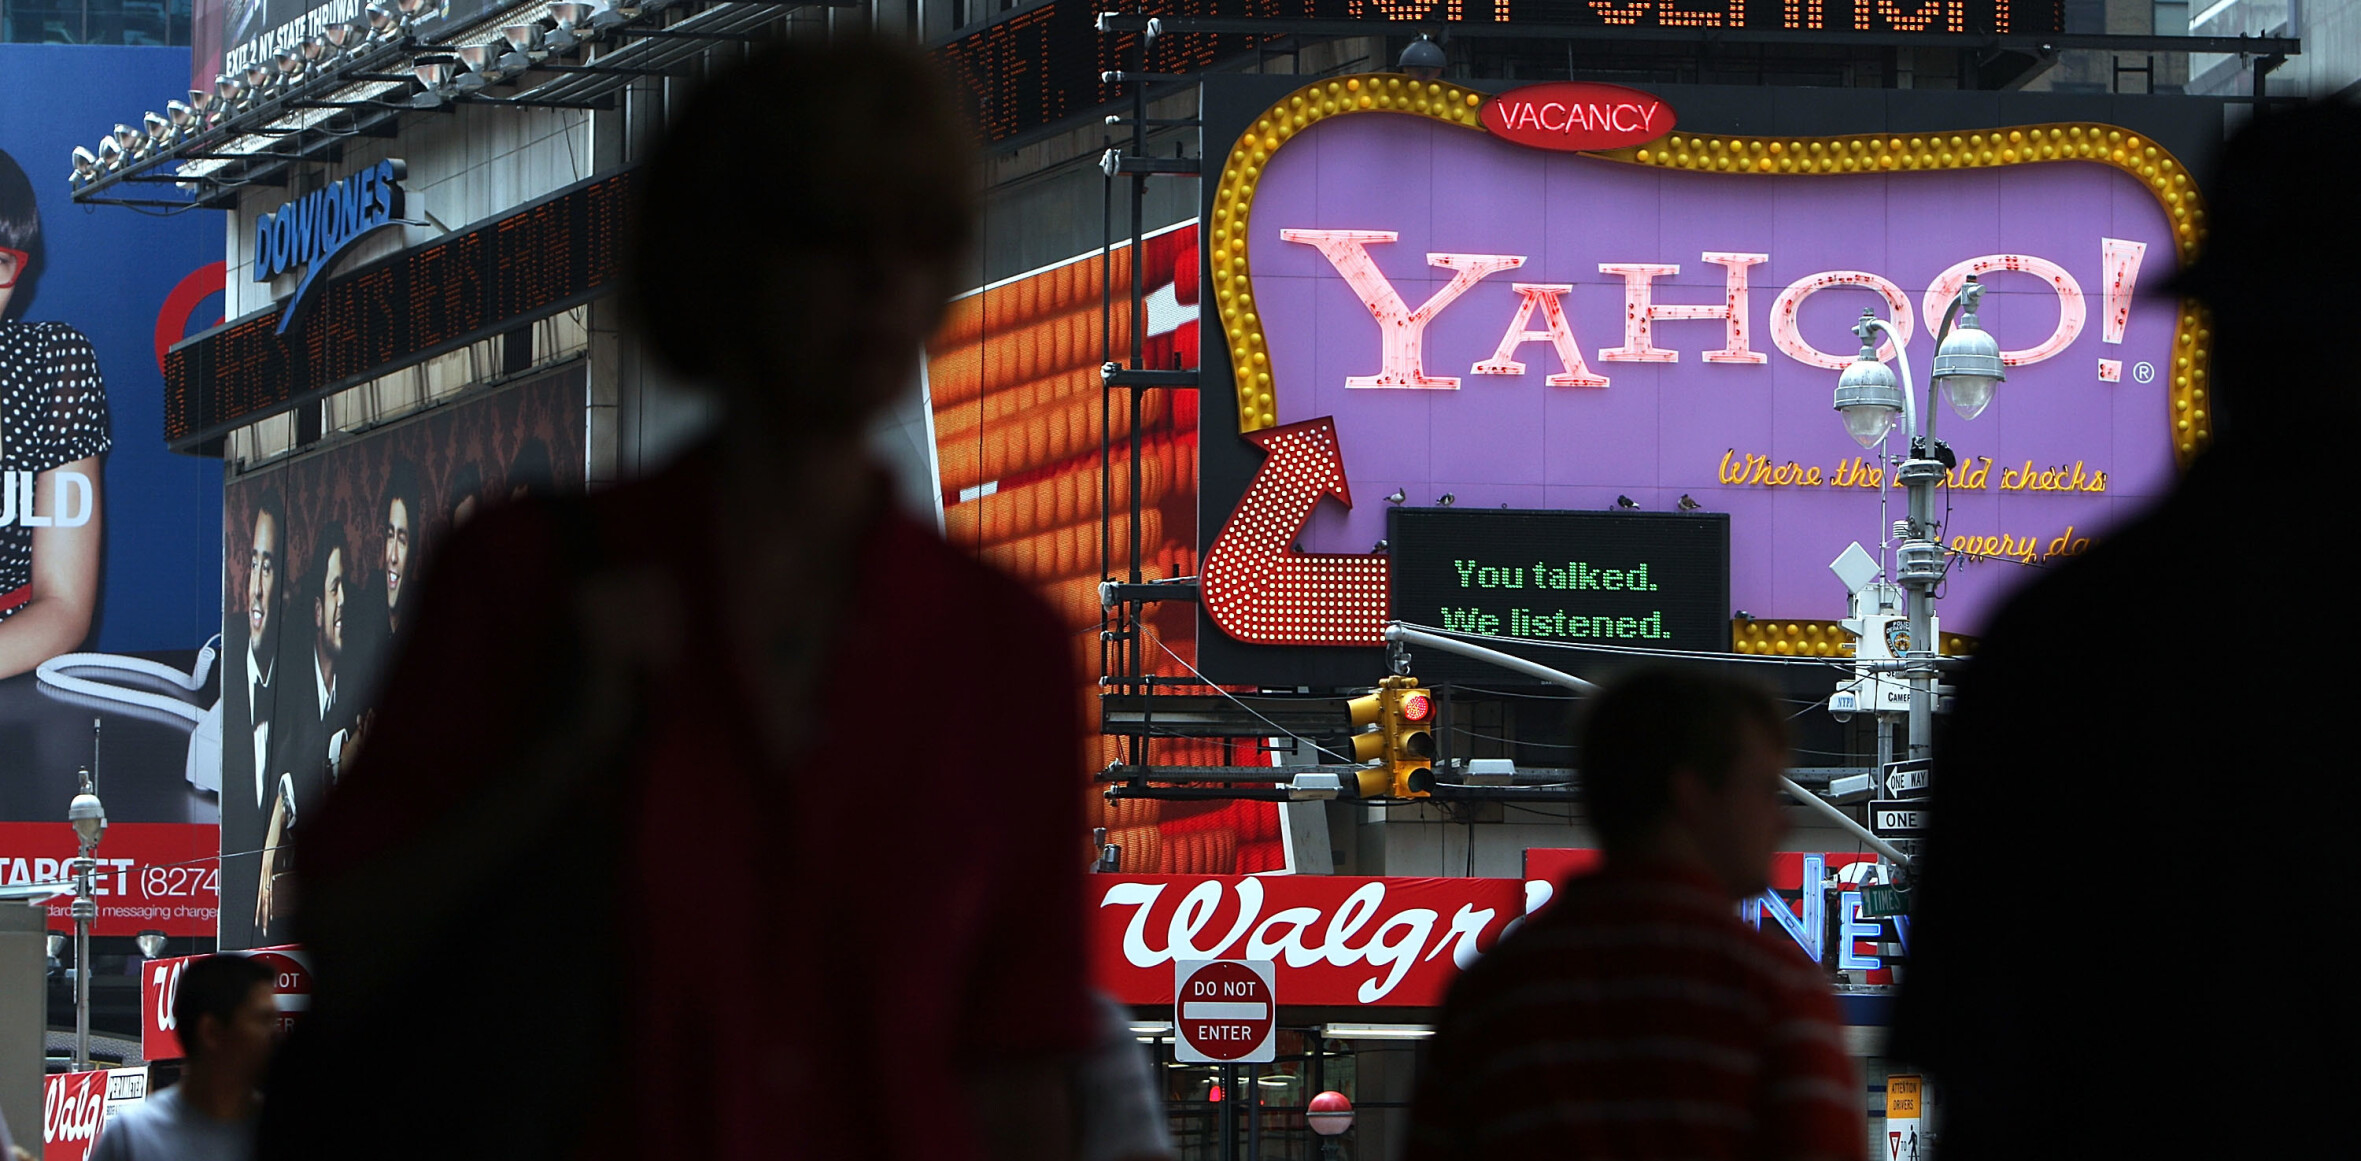 Marissa Mayer apologizes for Yahoo Mail outage, says access has been restored to ‘almost everyone’